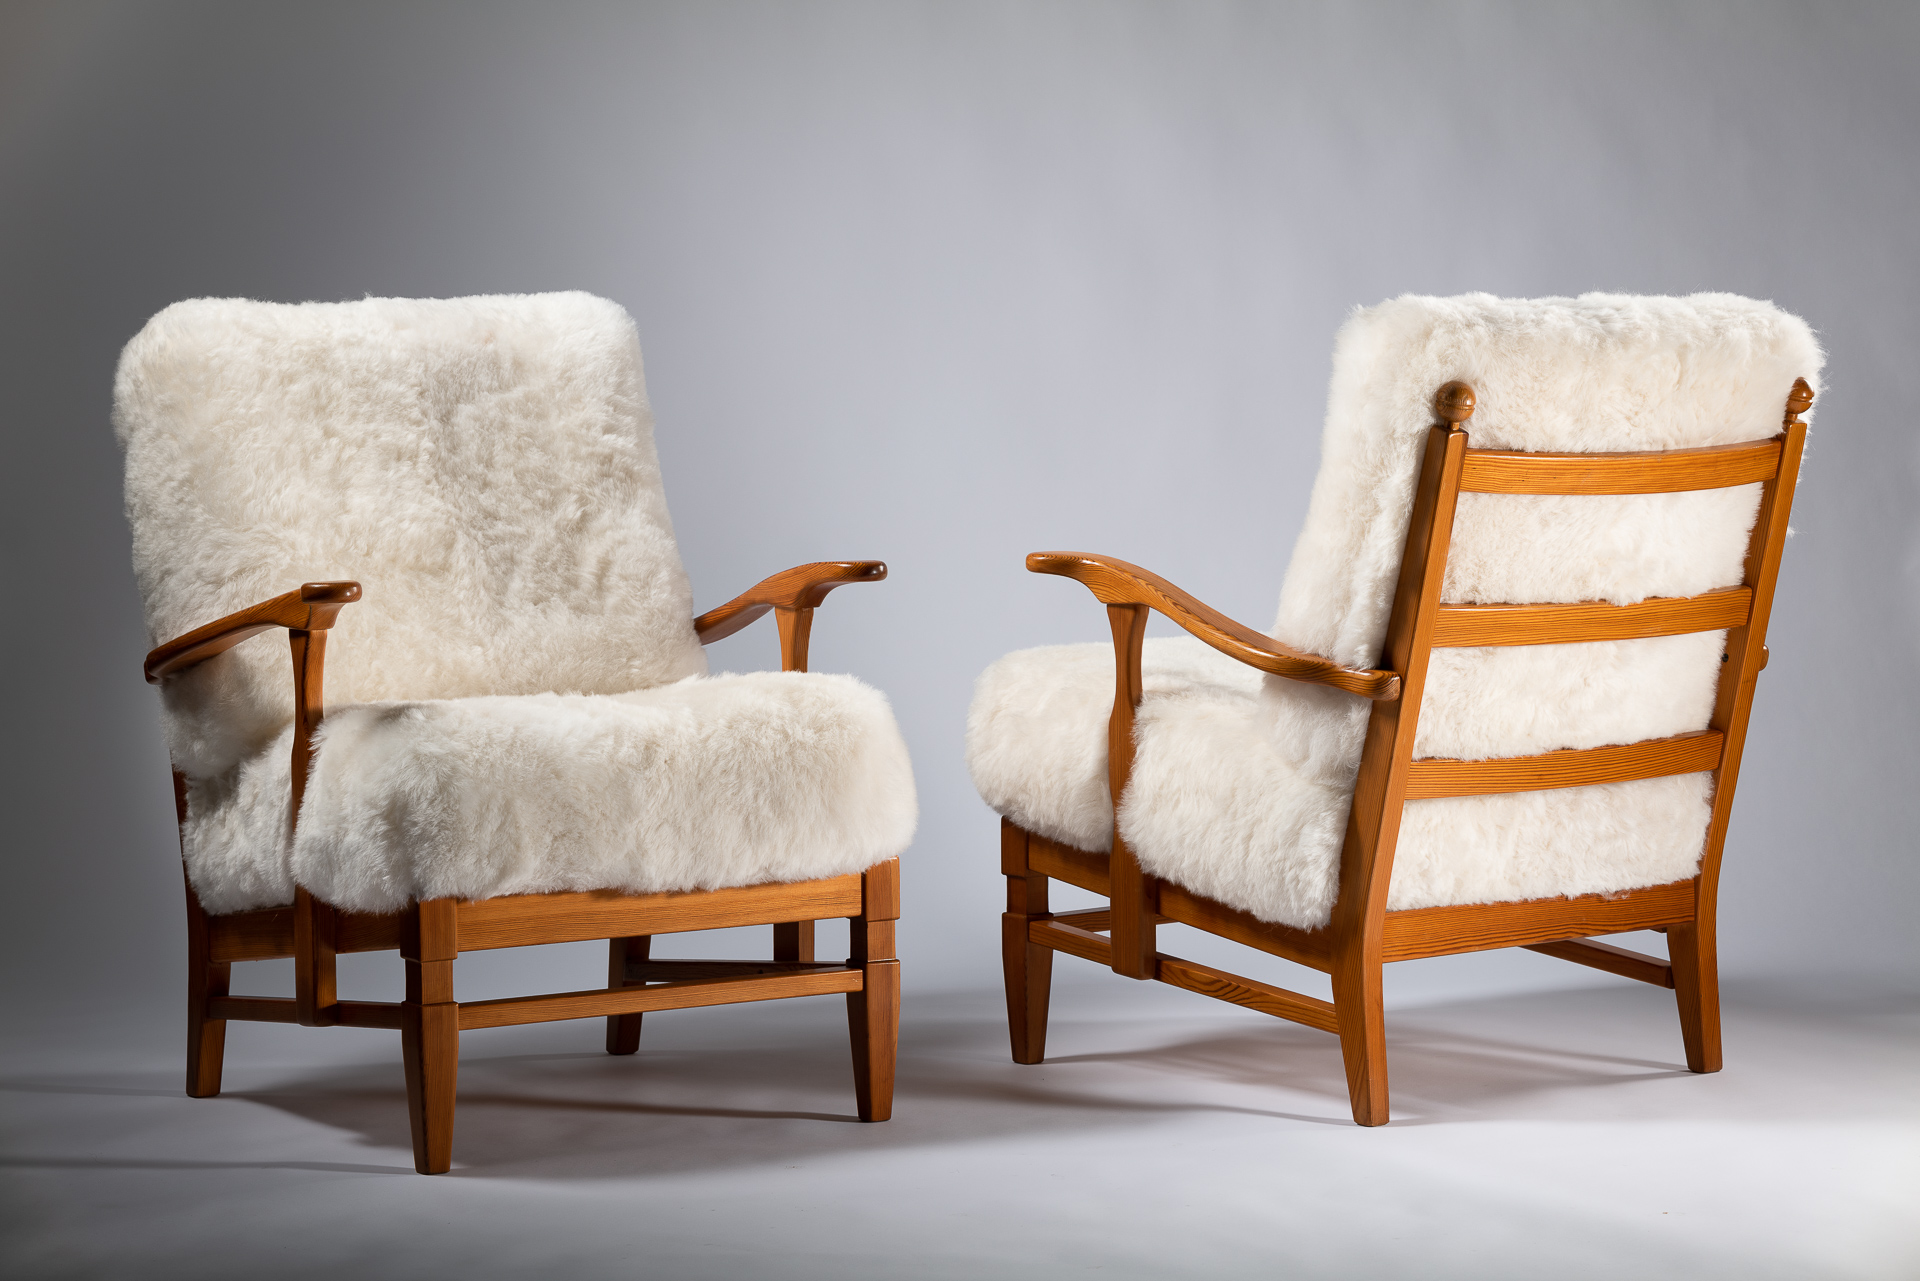 Pair of ARE armchairs by Gosta Göperts